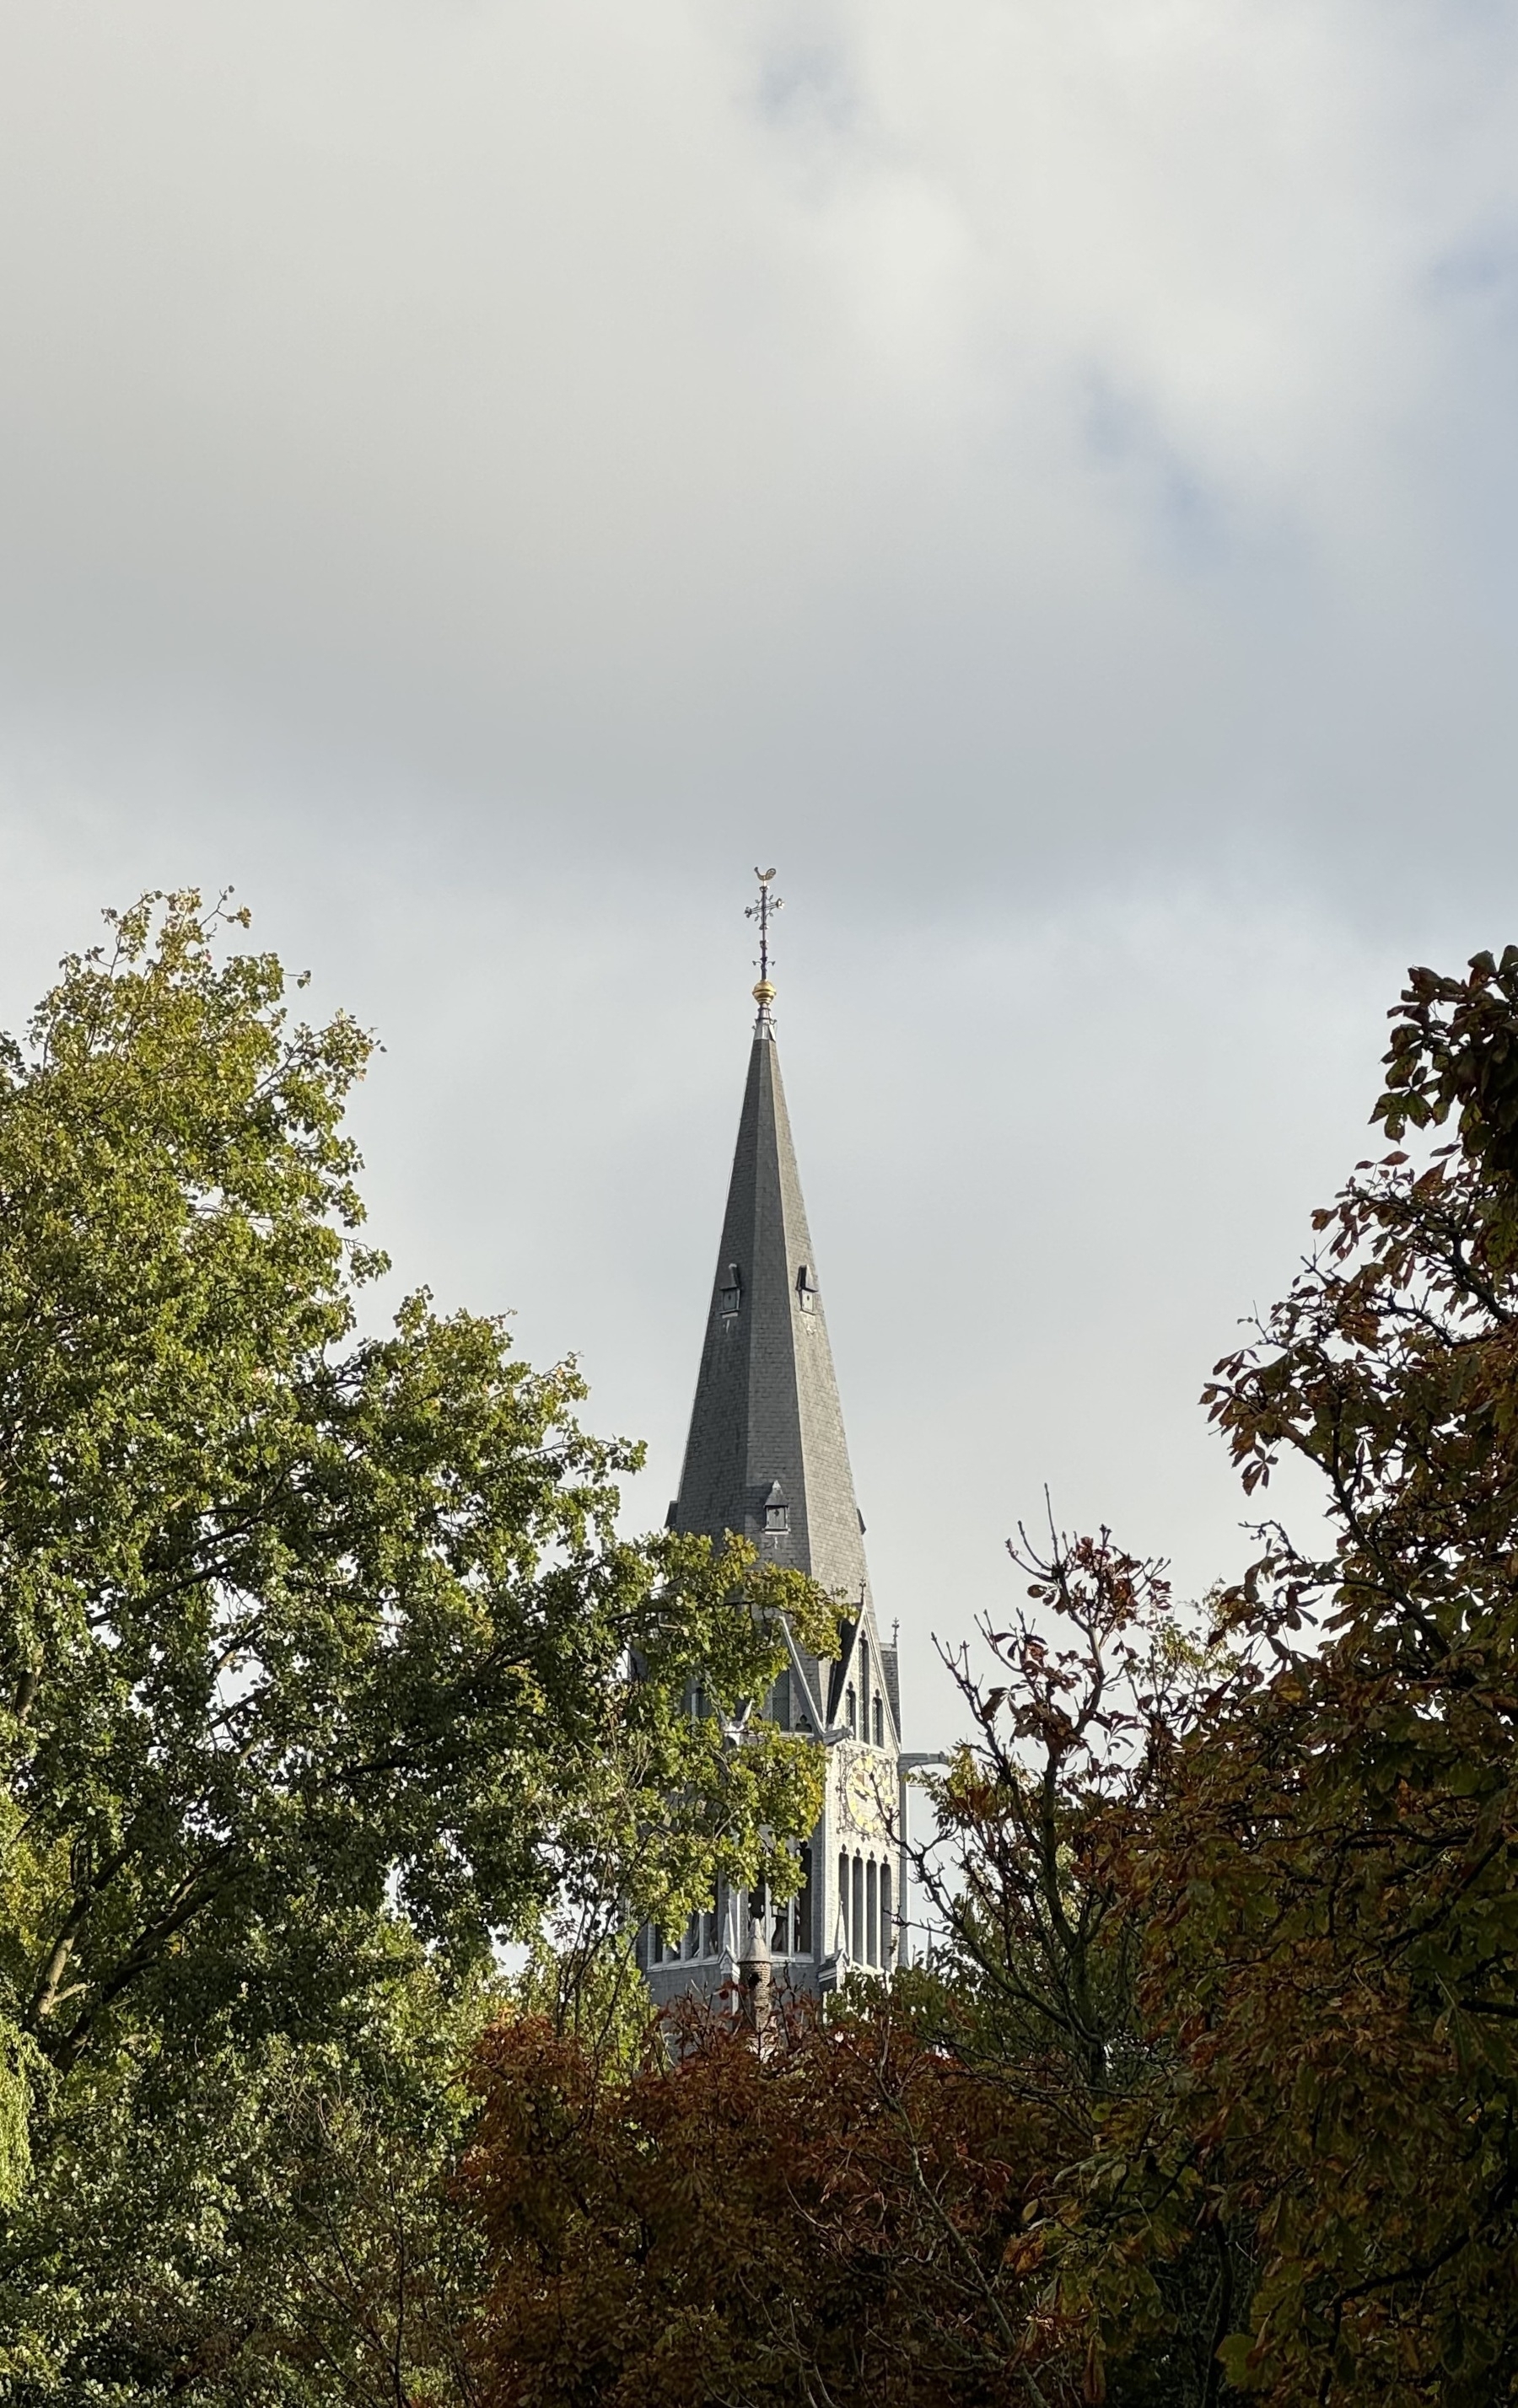 The top of a spire peeking through the trees.